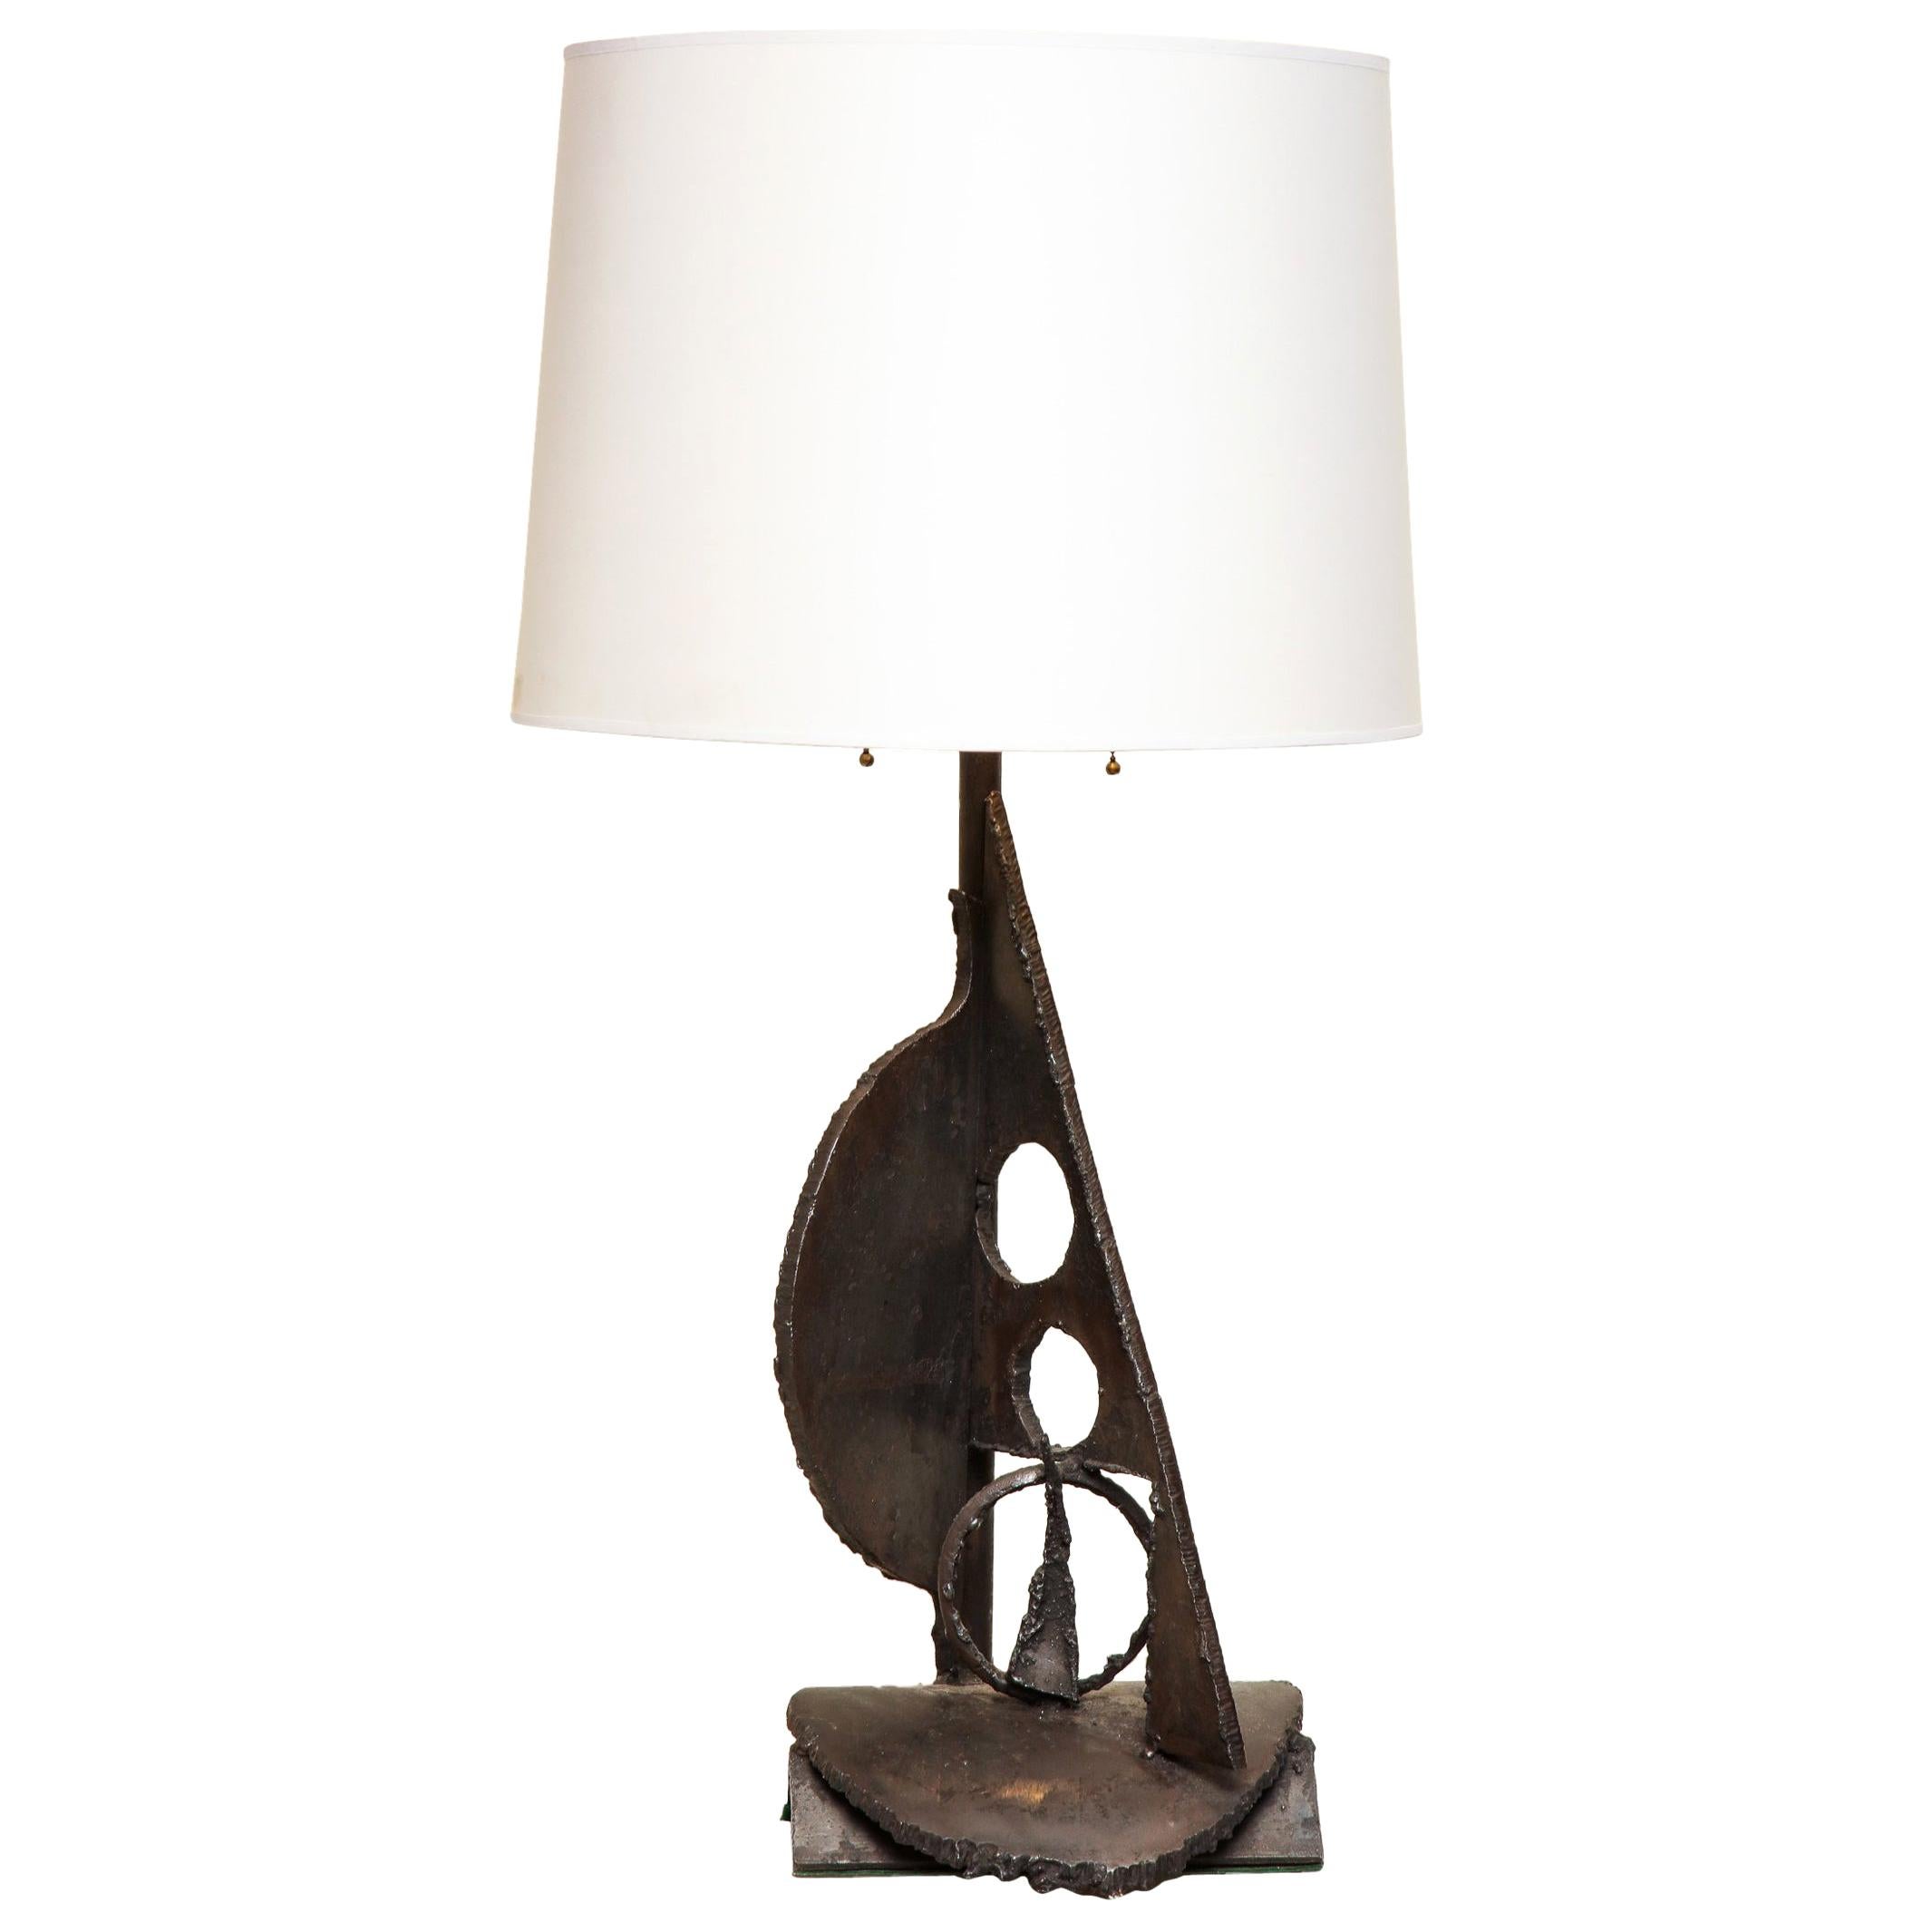 Brutaist Table Lamp Handcrafted Iron Mid-Century Modern American, 1960s For Sale